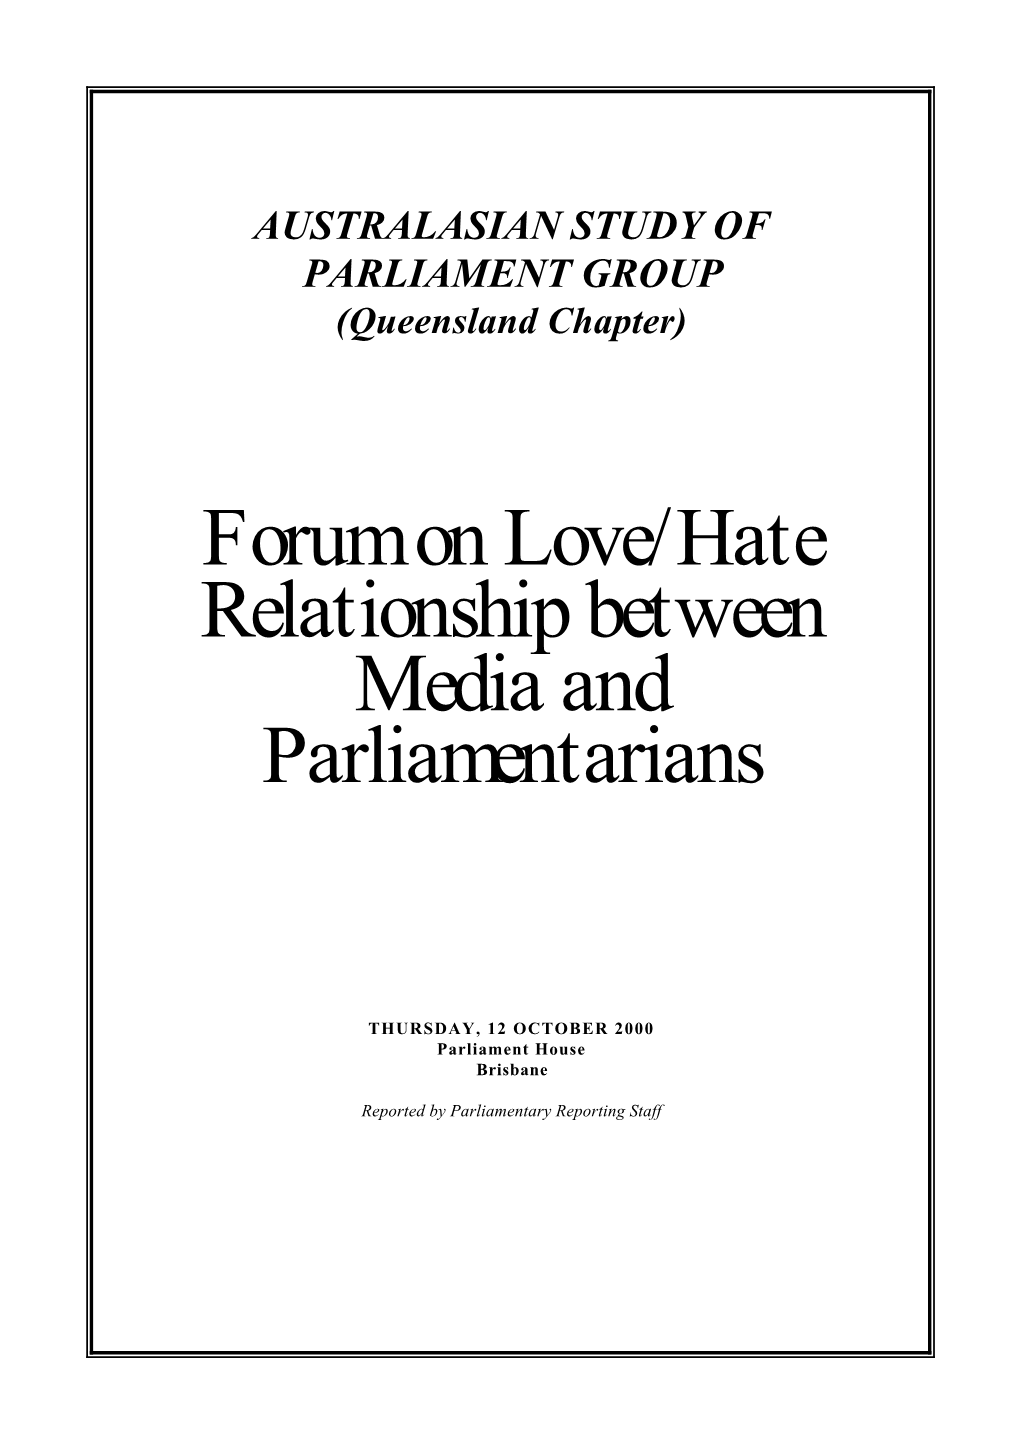 Forum on Love/Hate Relationship Between Media and Parliamentarians